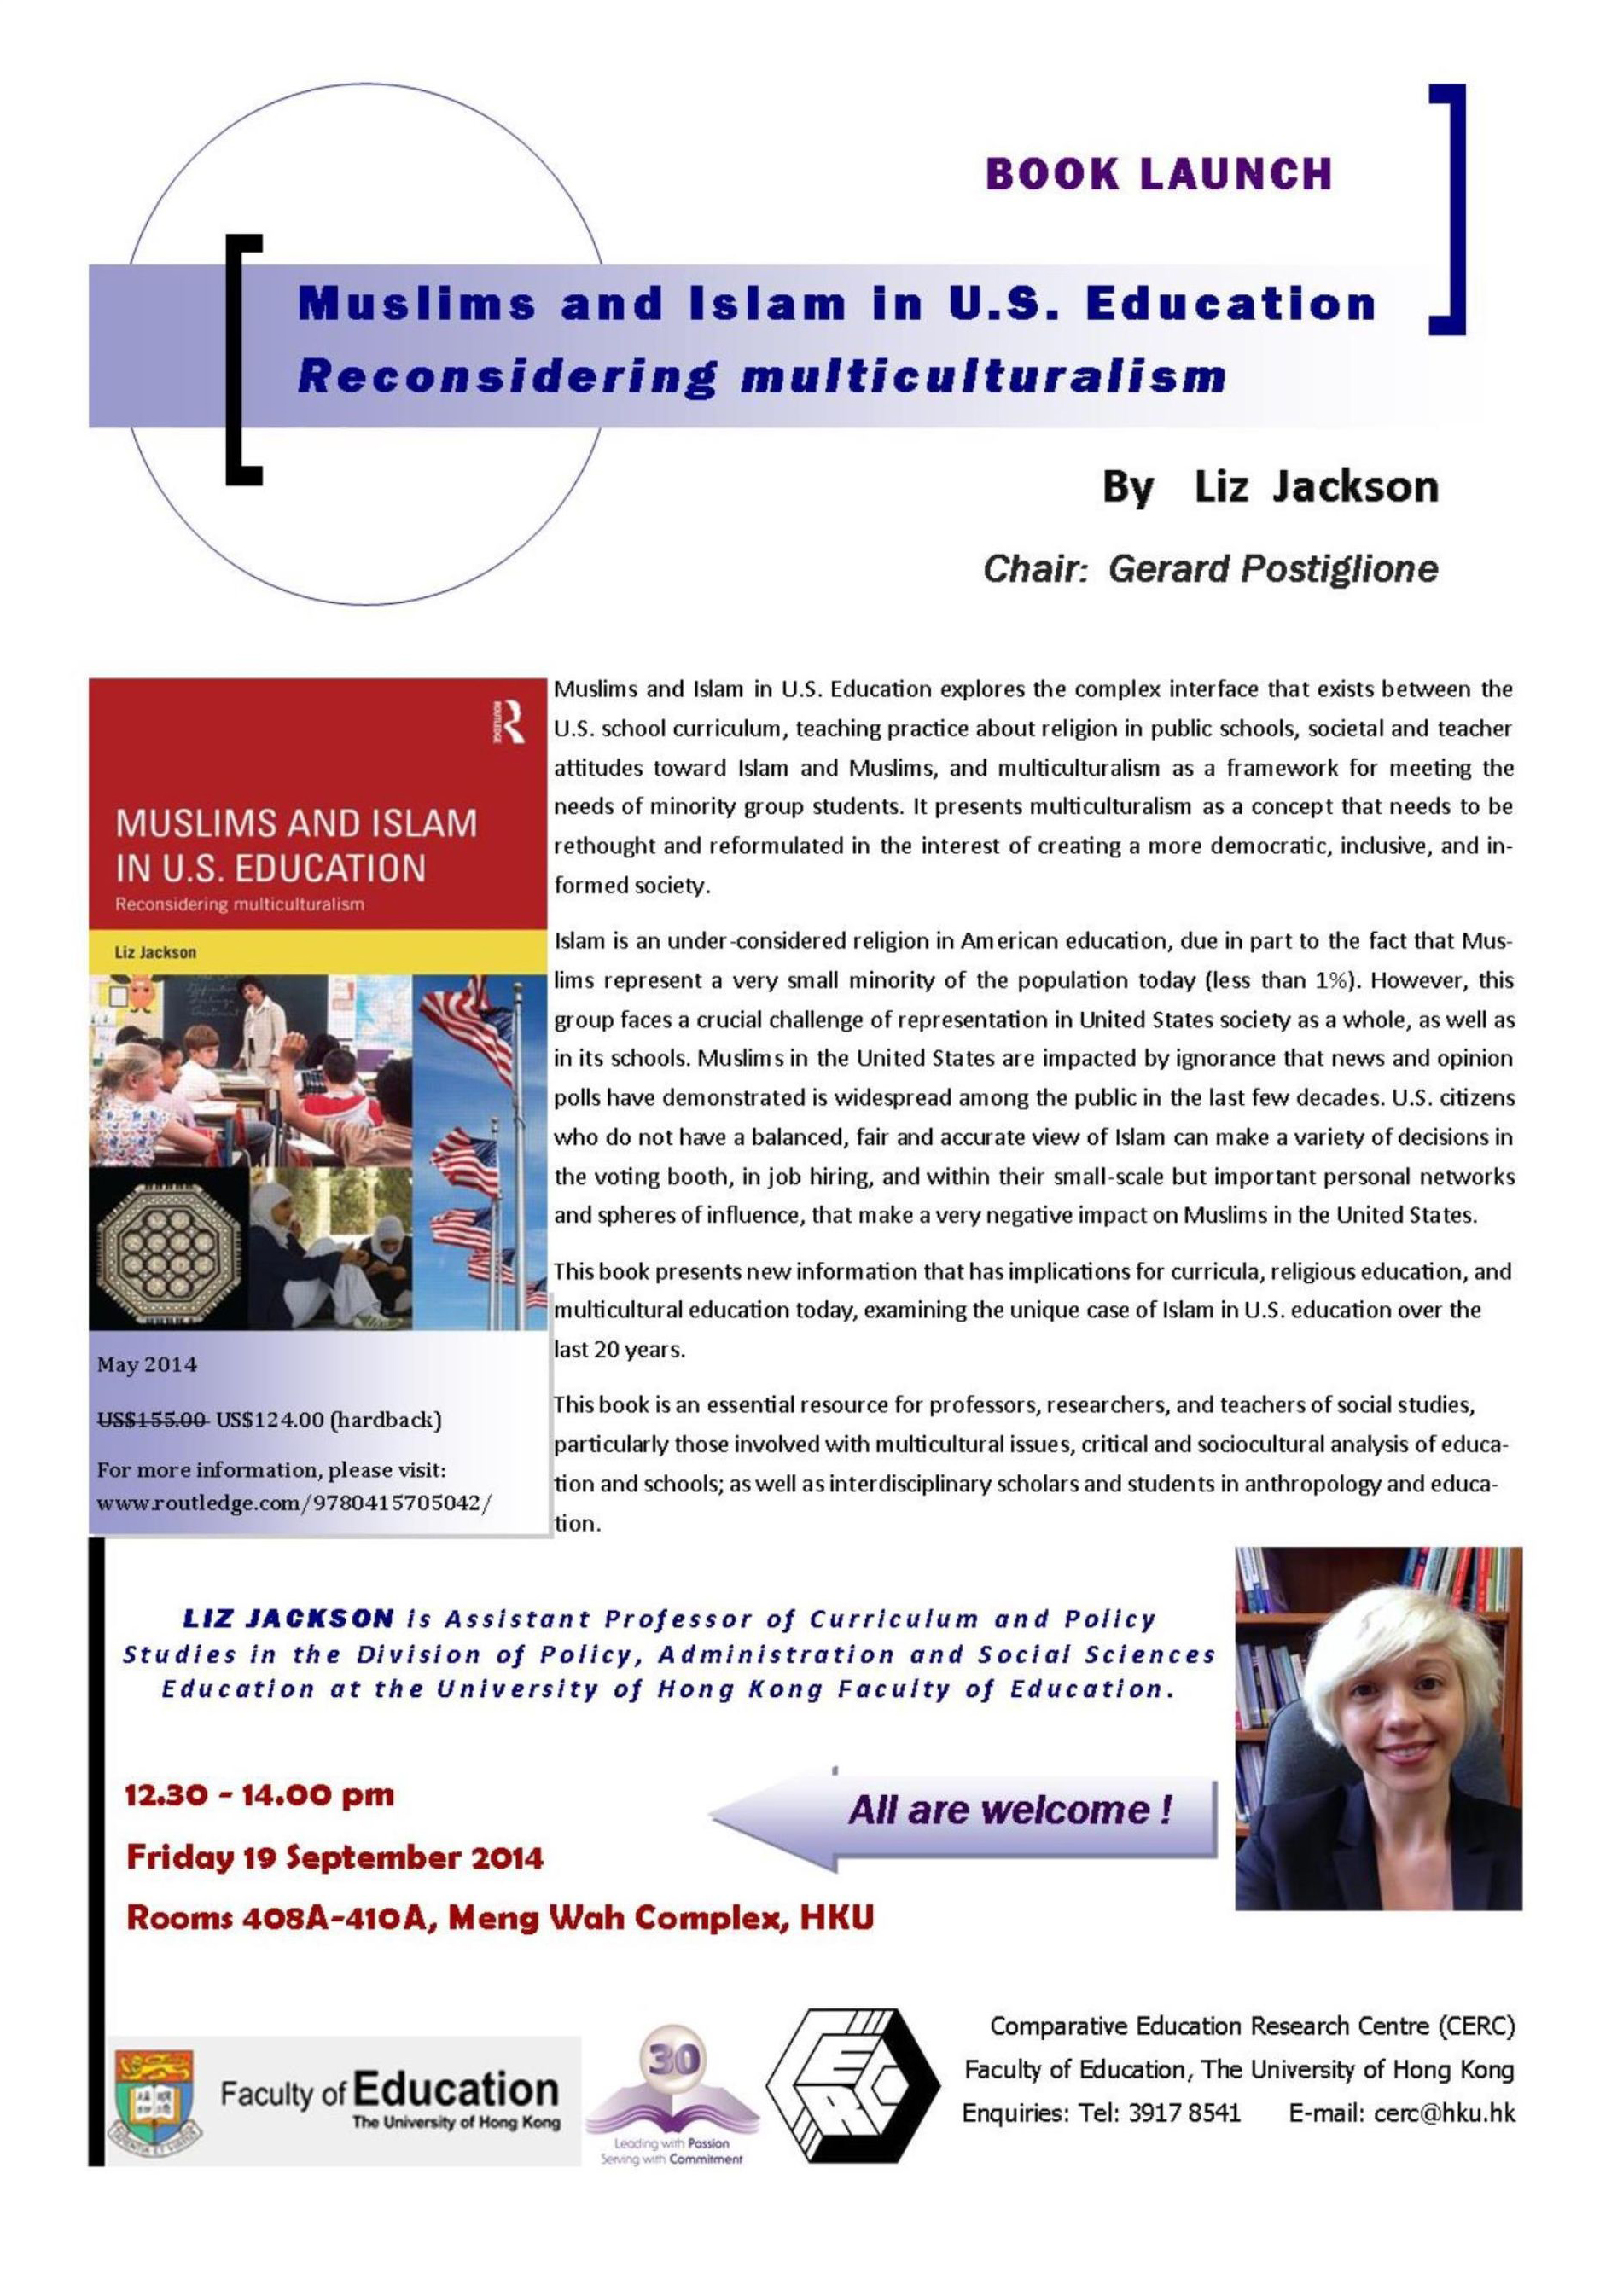 Book Launch by Dr Liz Jackson